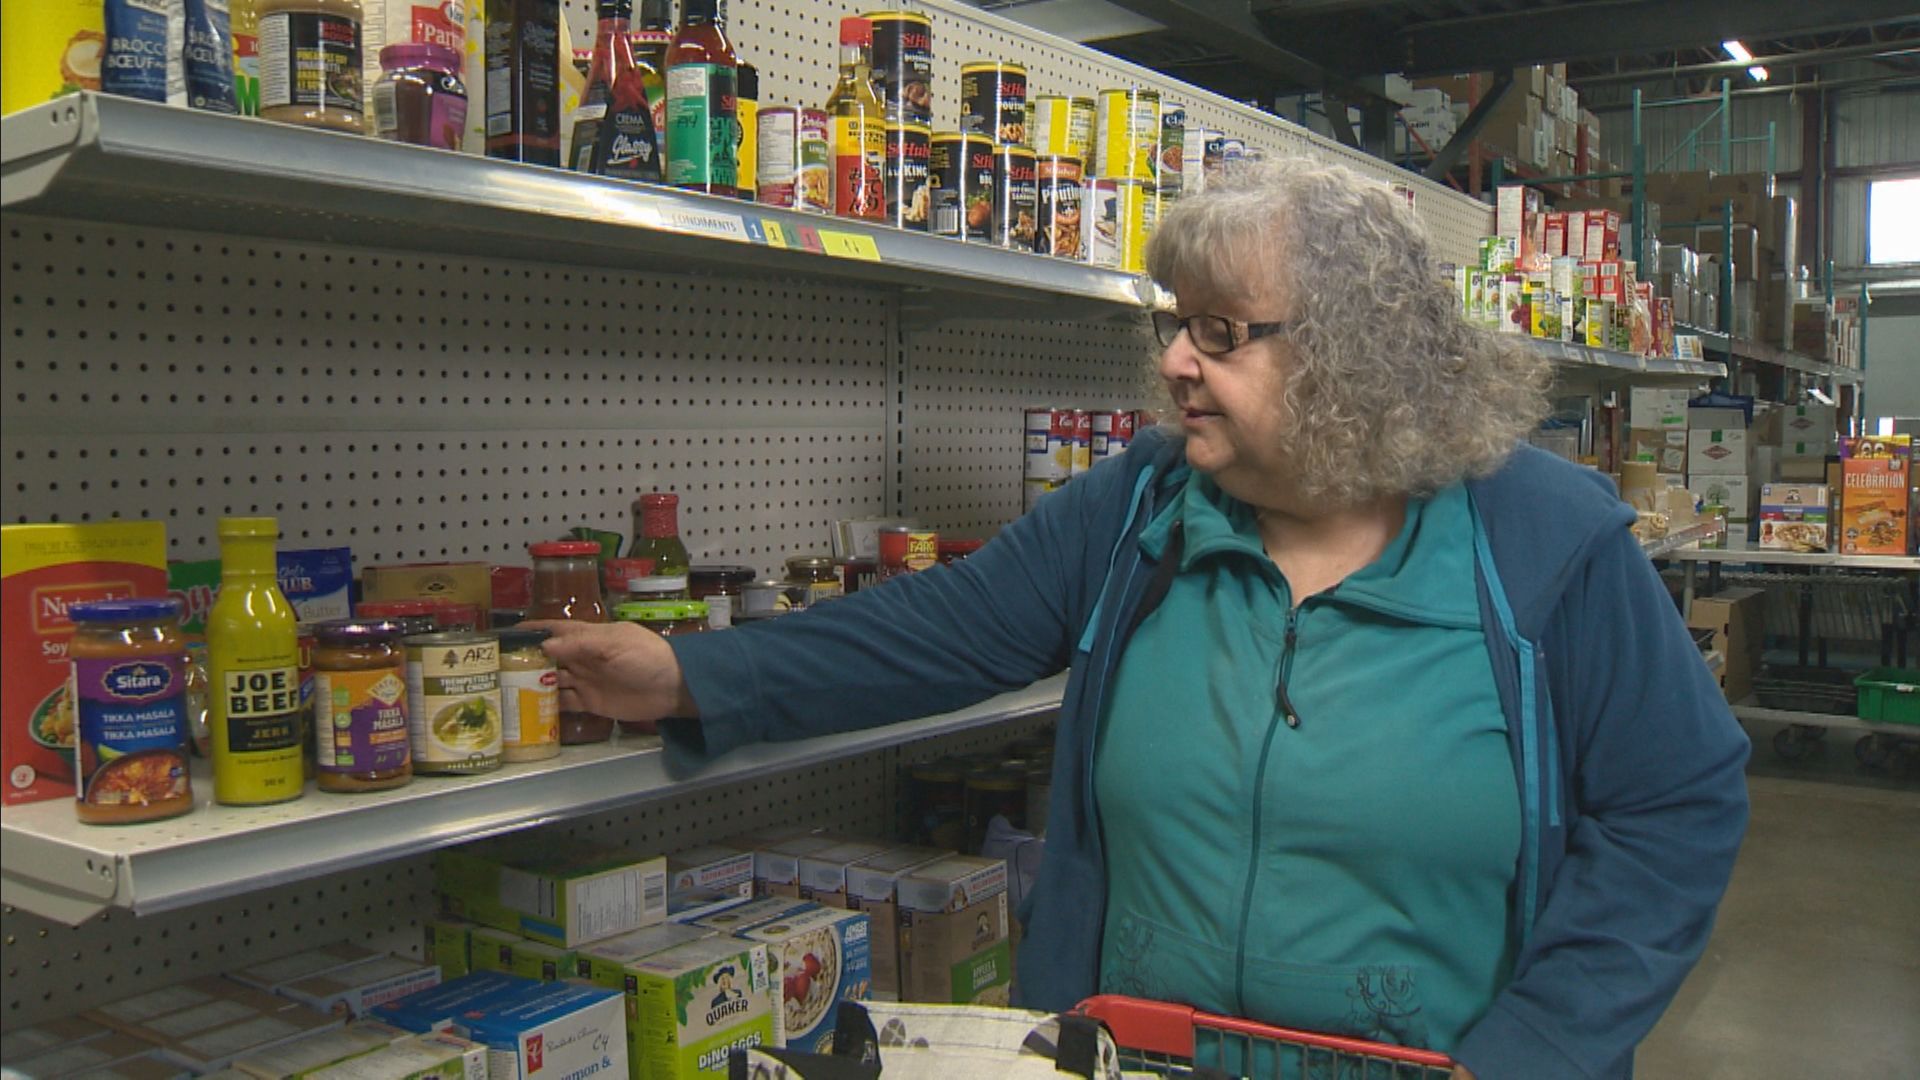 ‘Why am I getting so little pension?’ Quebec woman turns to food bank, can’t make ends meet